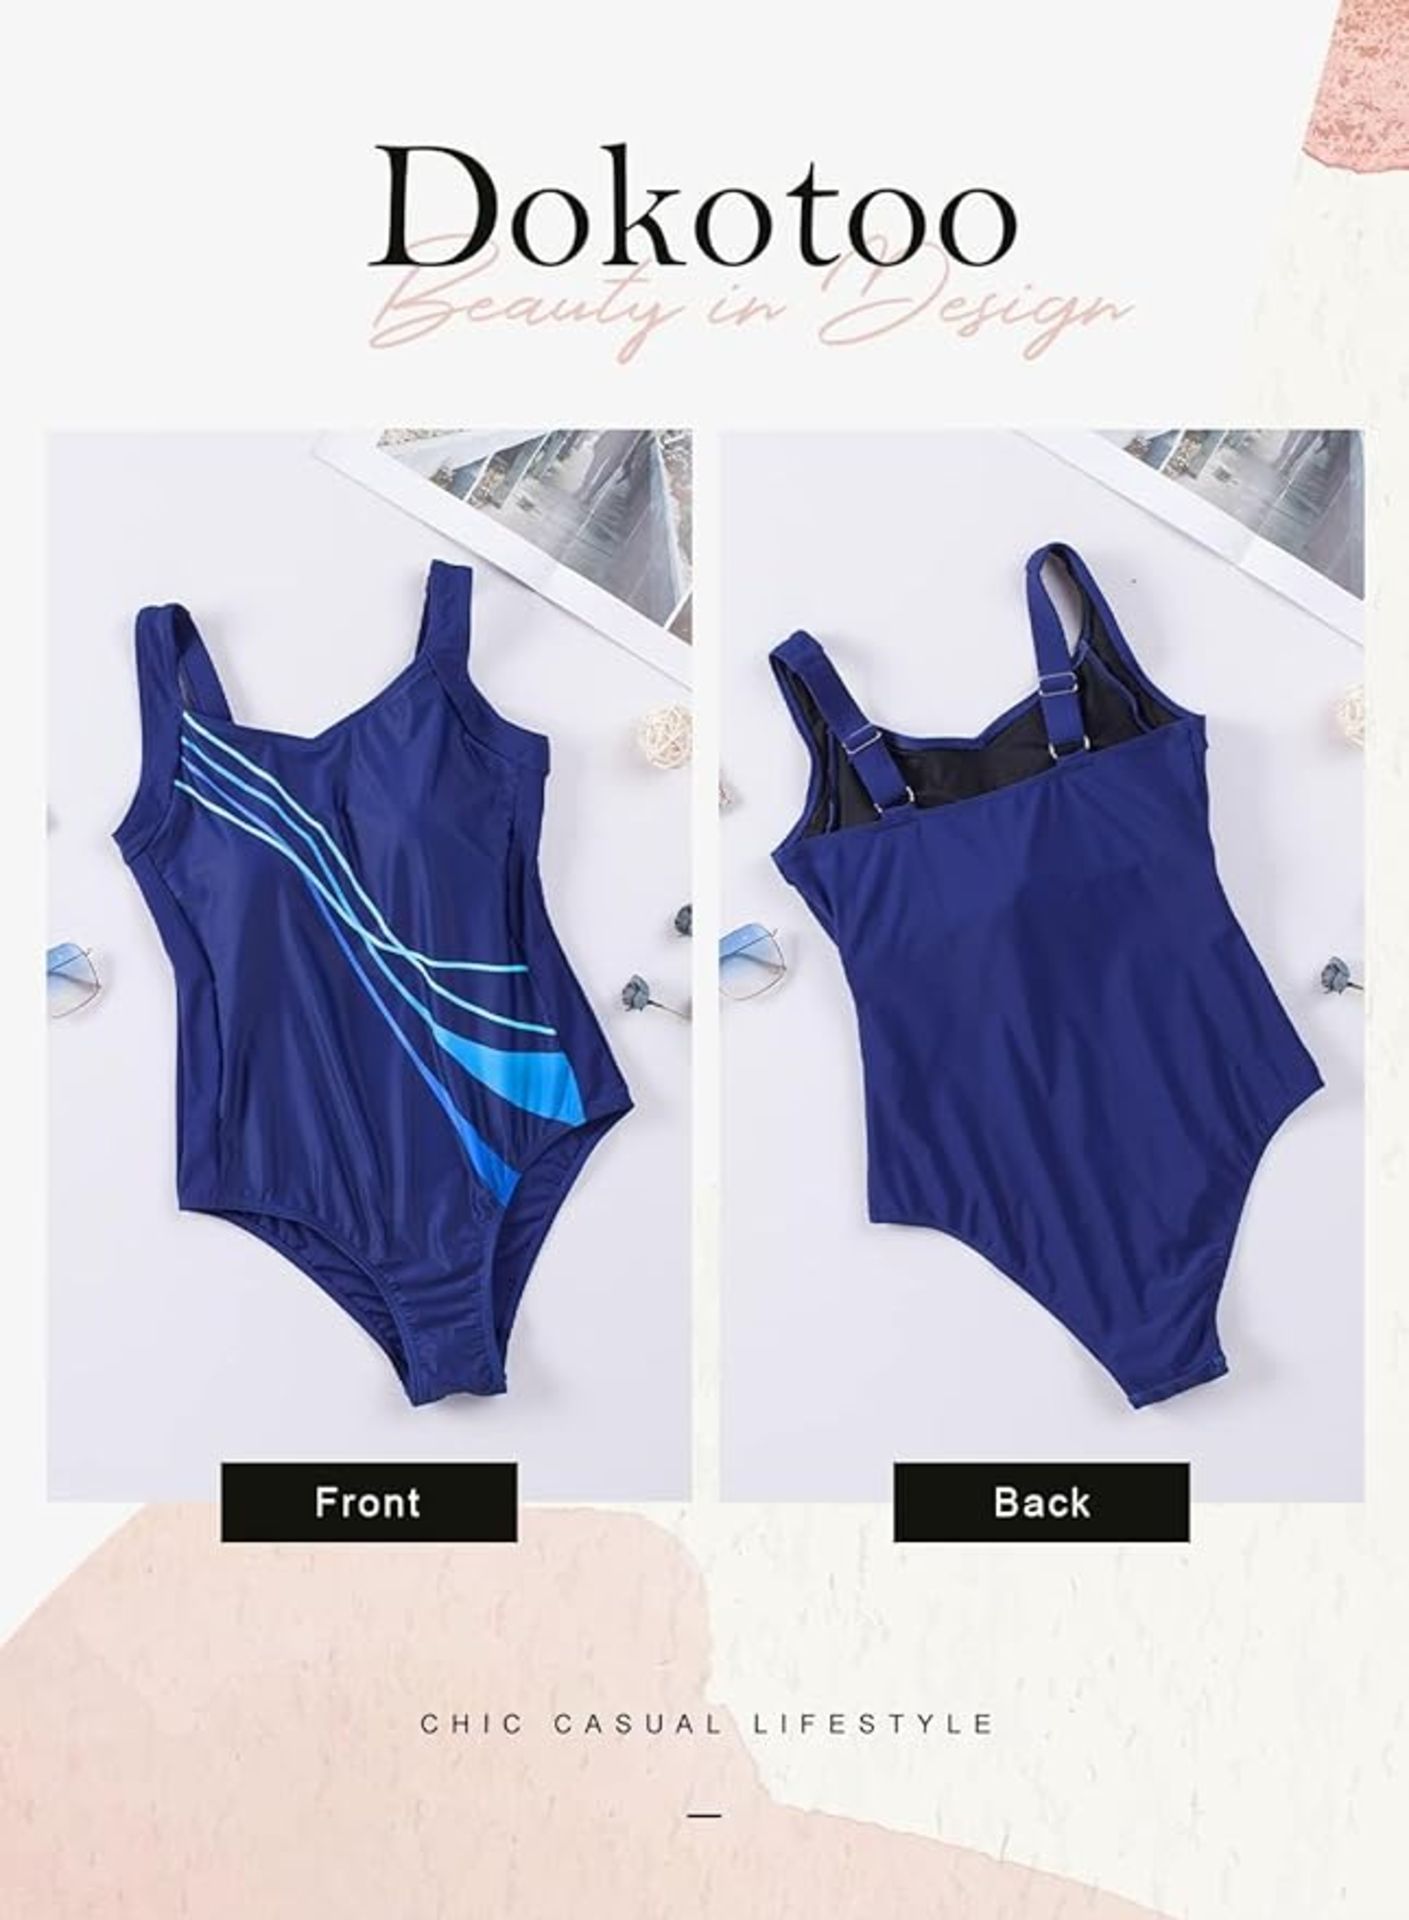 Approx RRP £500, Collection of Dokotoo Women's Swimming Costumes, 20 Pieces